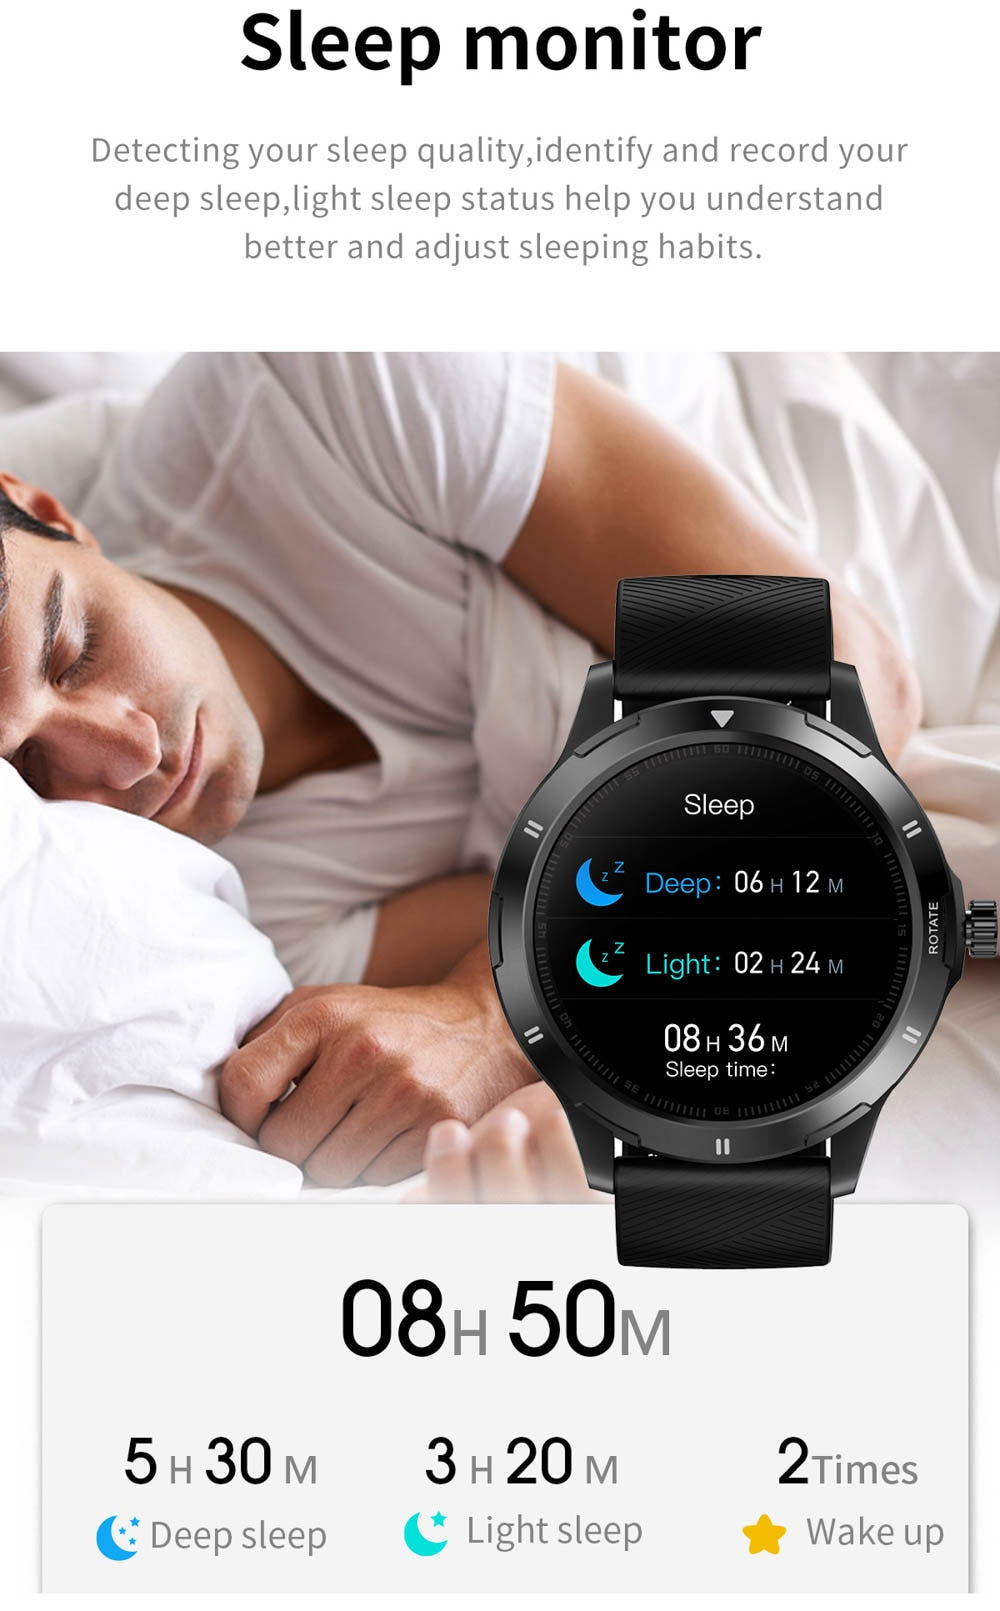 Touch Screen Multi-Dial Smartwatch Thermometer Watch  Full  For Android IOS Phone Multi-Mode Sports Fitness Tracker